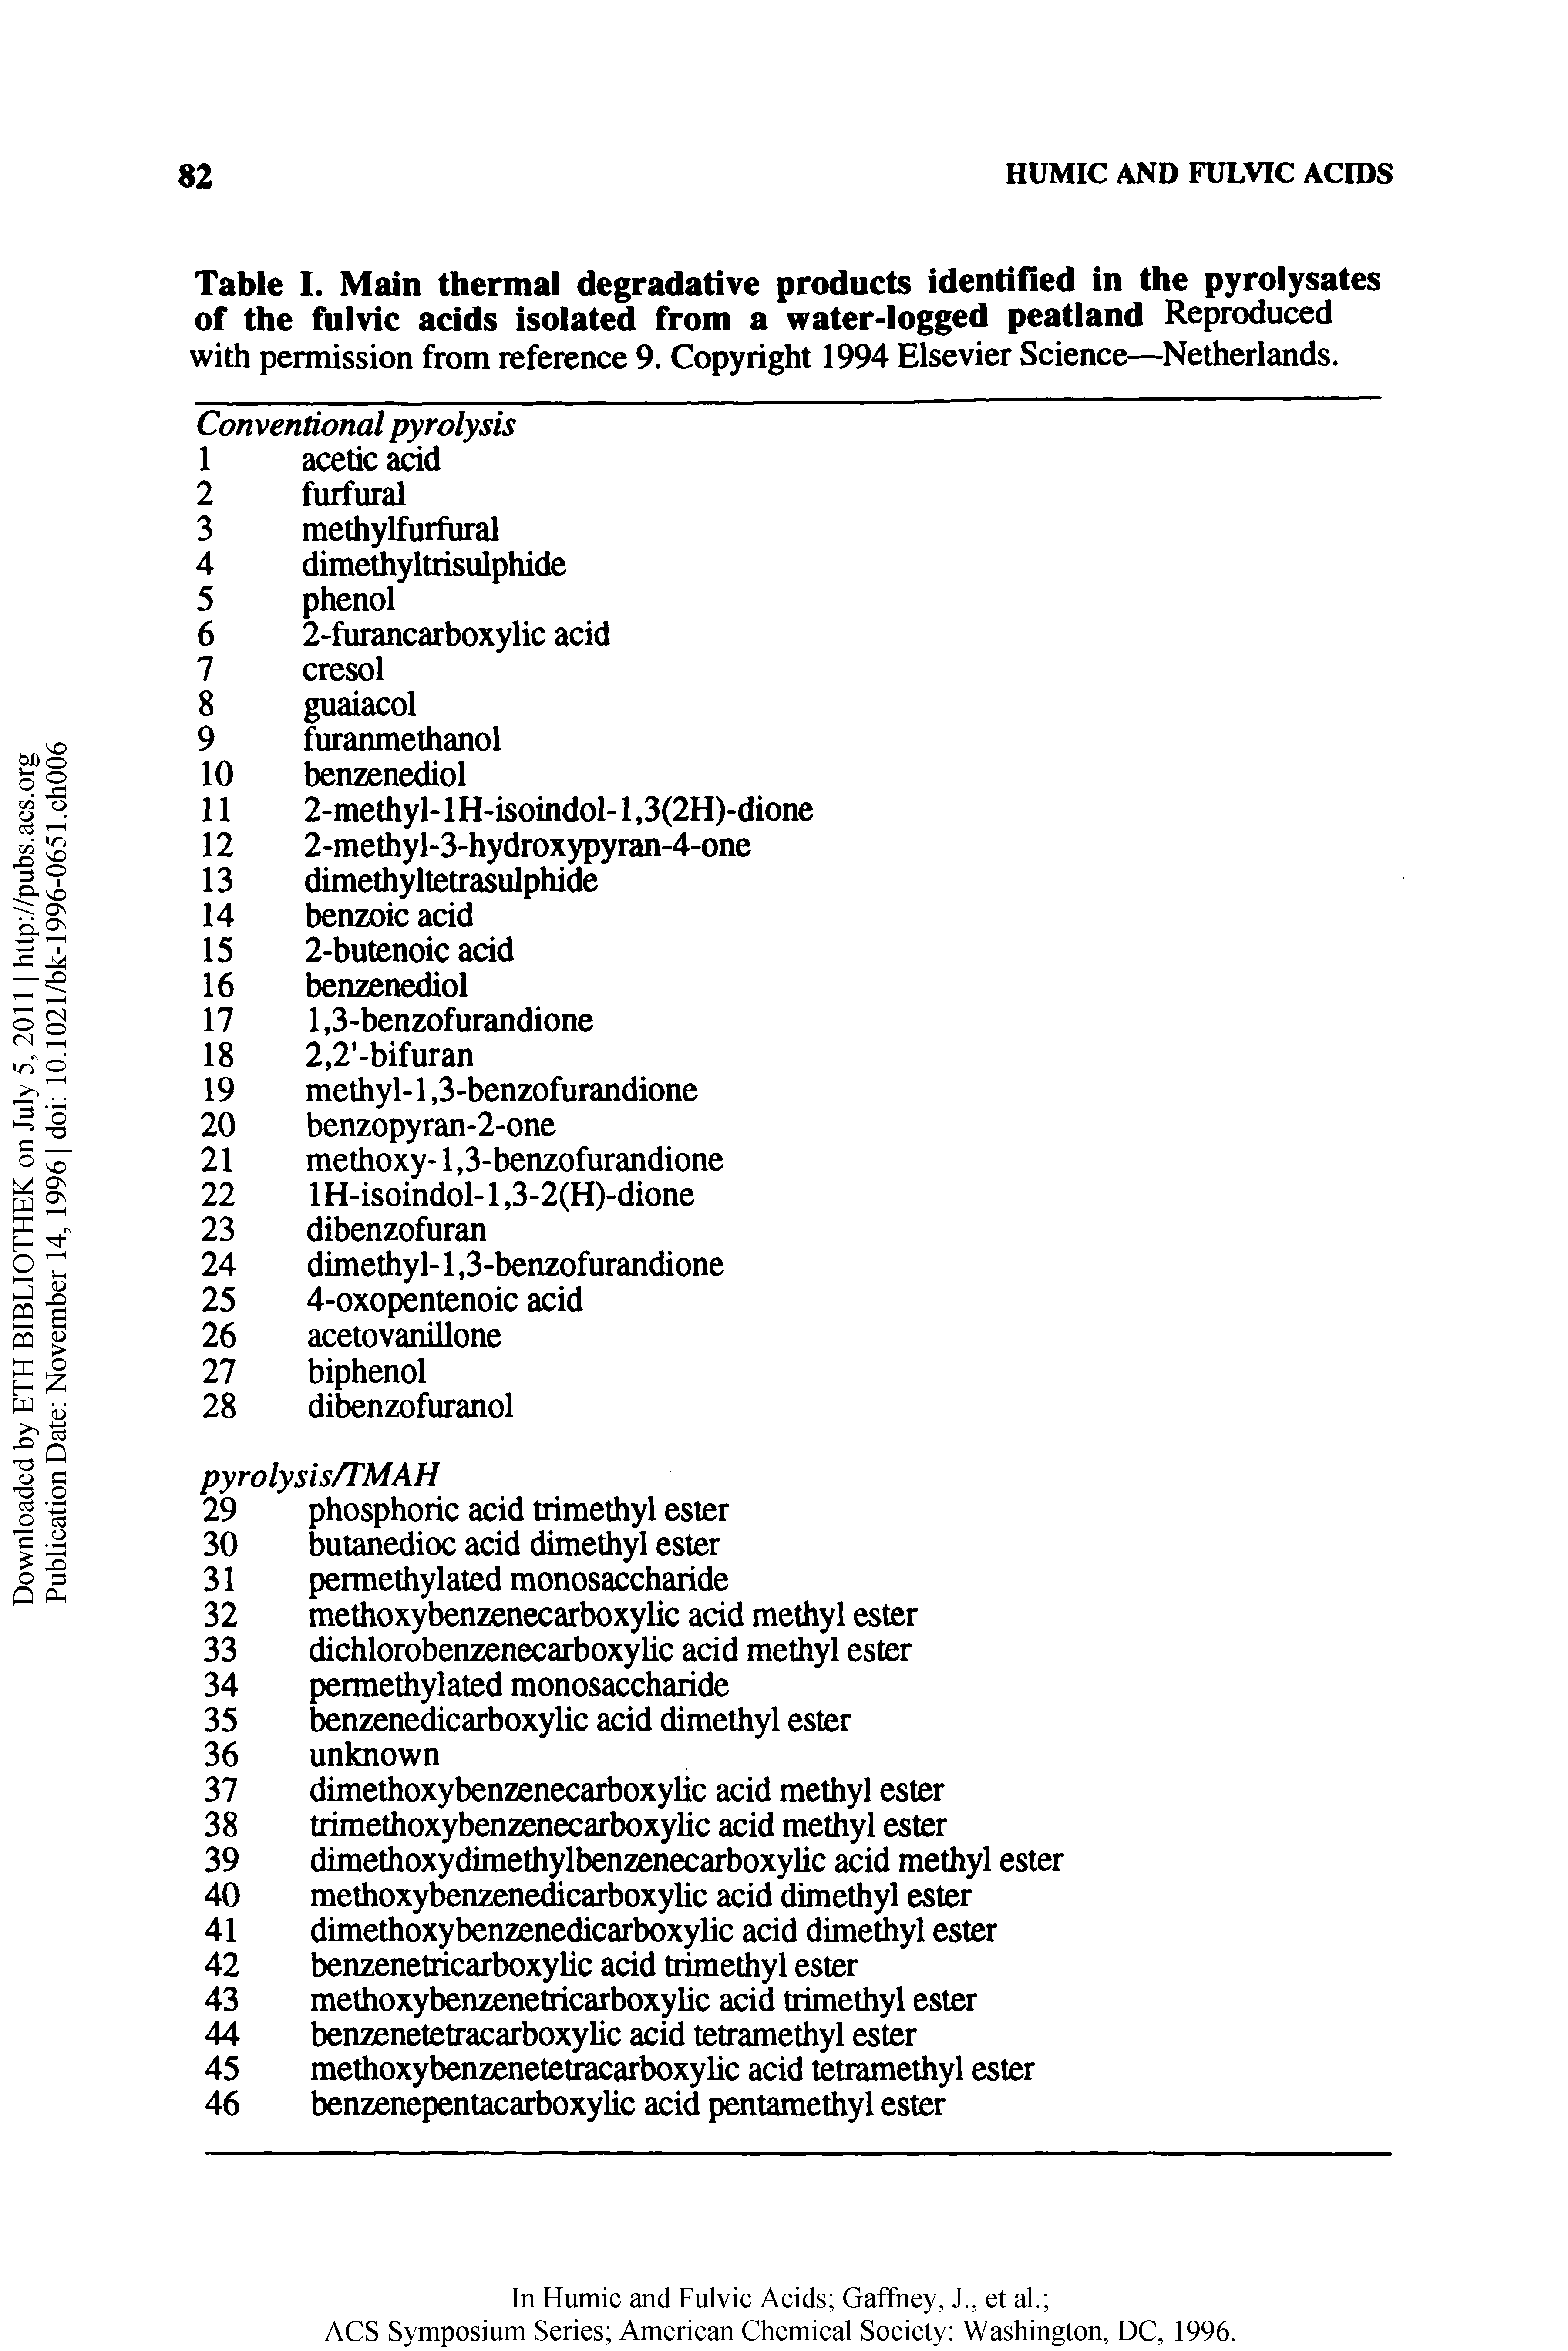 Table I. Main thermal degradative products identified in the pyrolysates of the fulvic acids isolated from a water-logged peatland Reproduced with permission from reference 9. Copyright 1994 Elsevier Science—Netherlands.